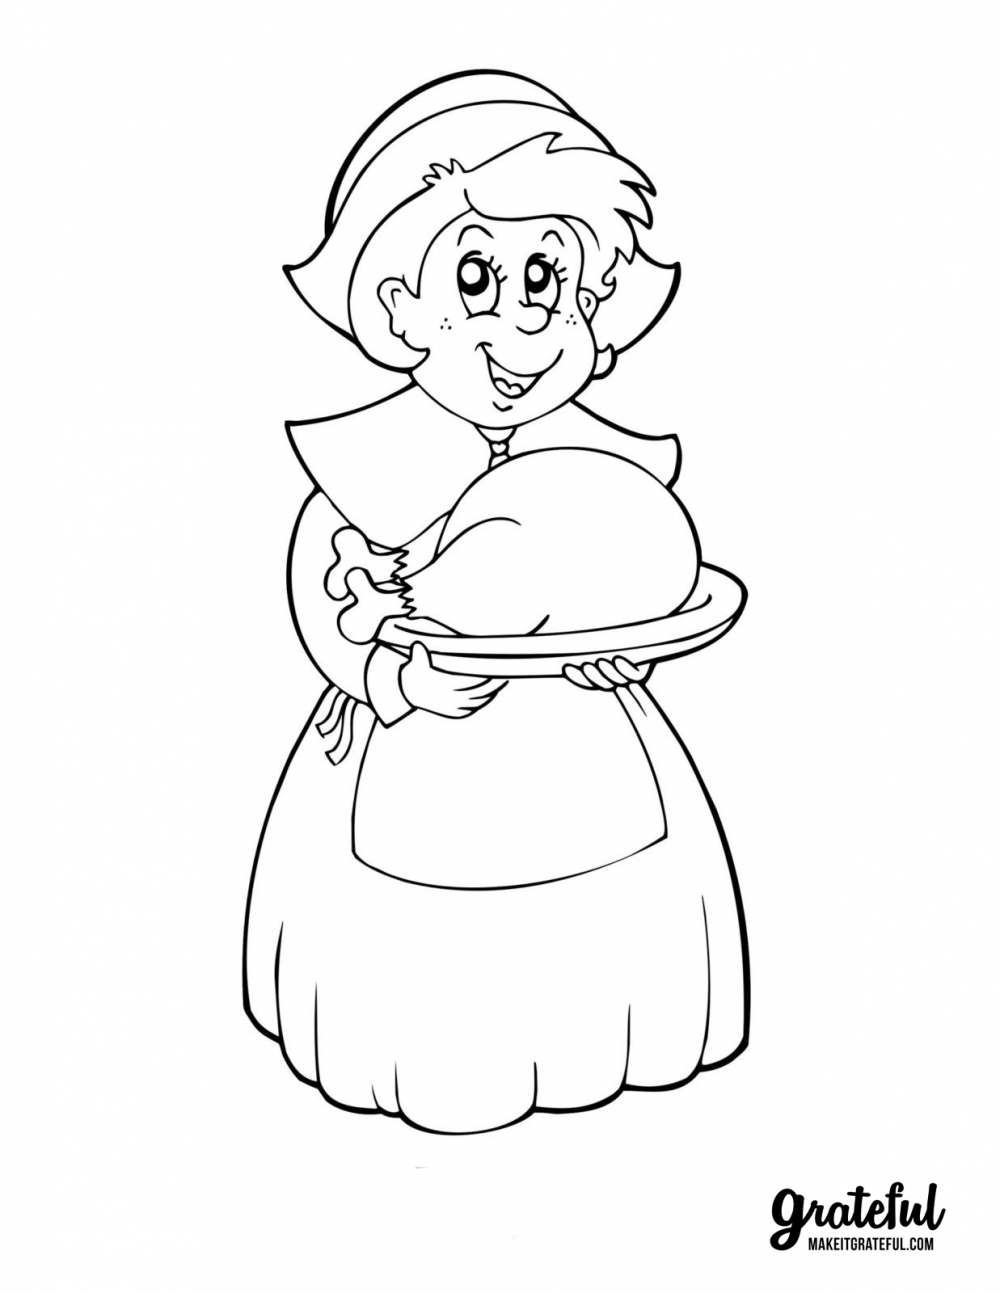 Pilgrim woman - Thanksgiving coloring pages